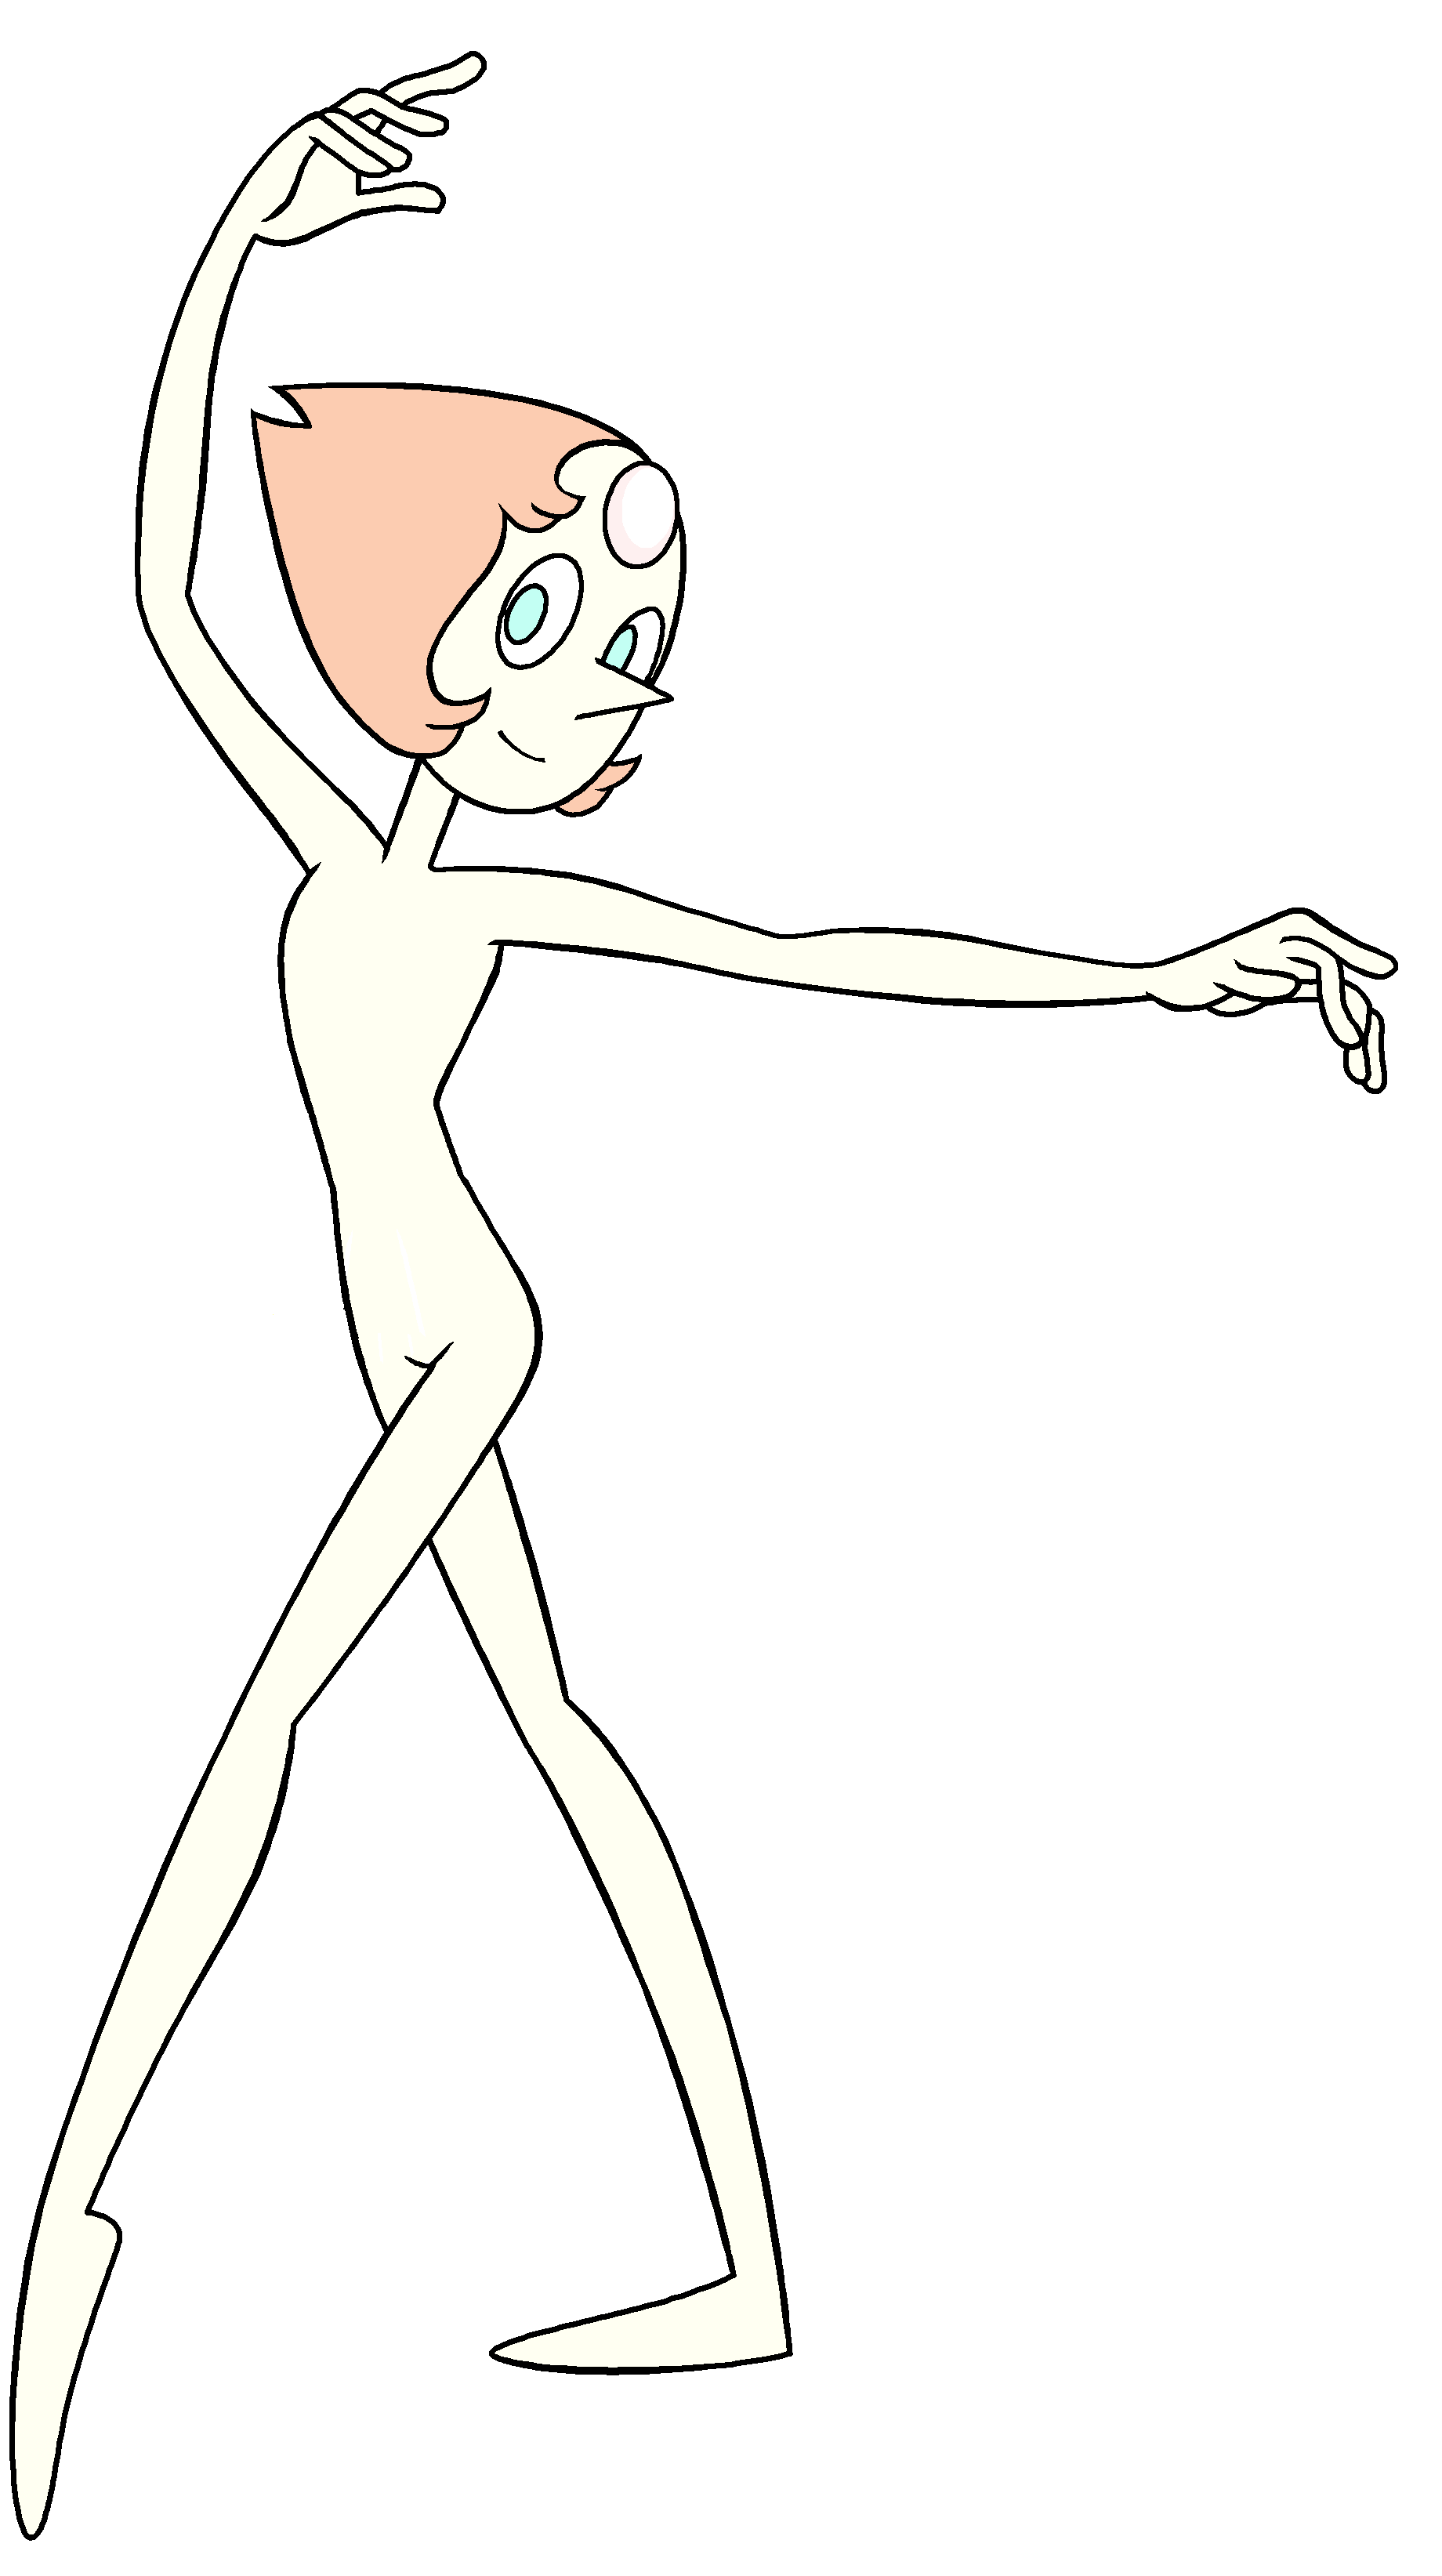 Image Pearl Basepng Steven Universe Wiki Fandom Powered By Wikia 3075